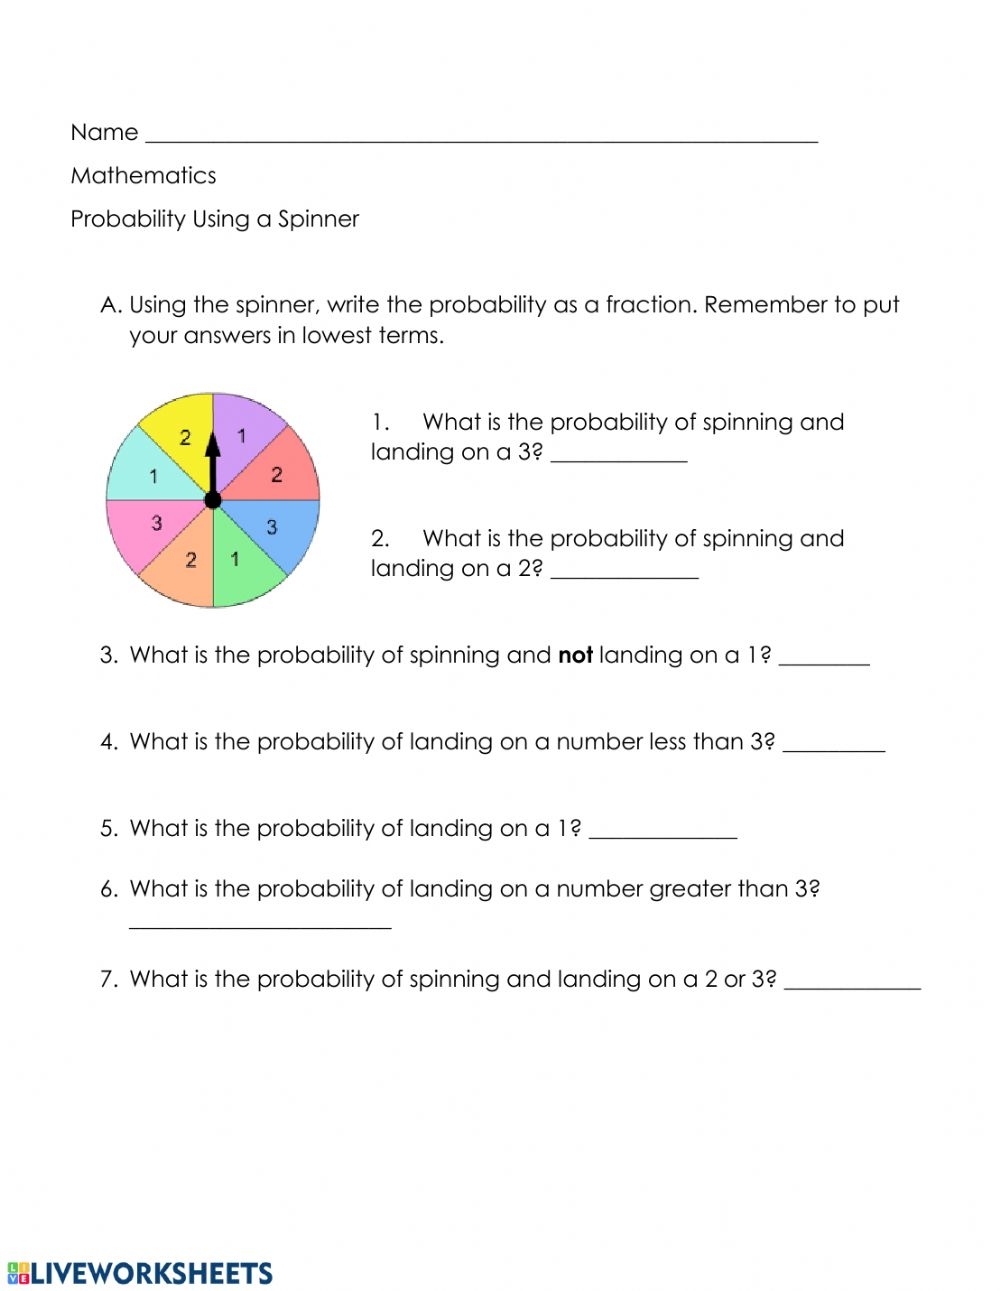 probability-as-a-fraction-interactive-worksheet-math-worksheet-answers